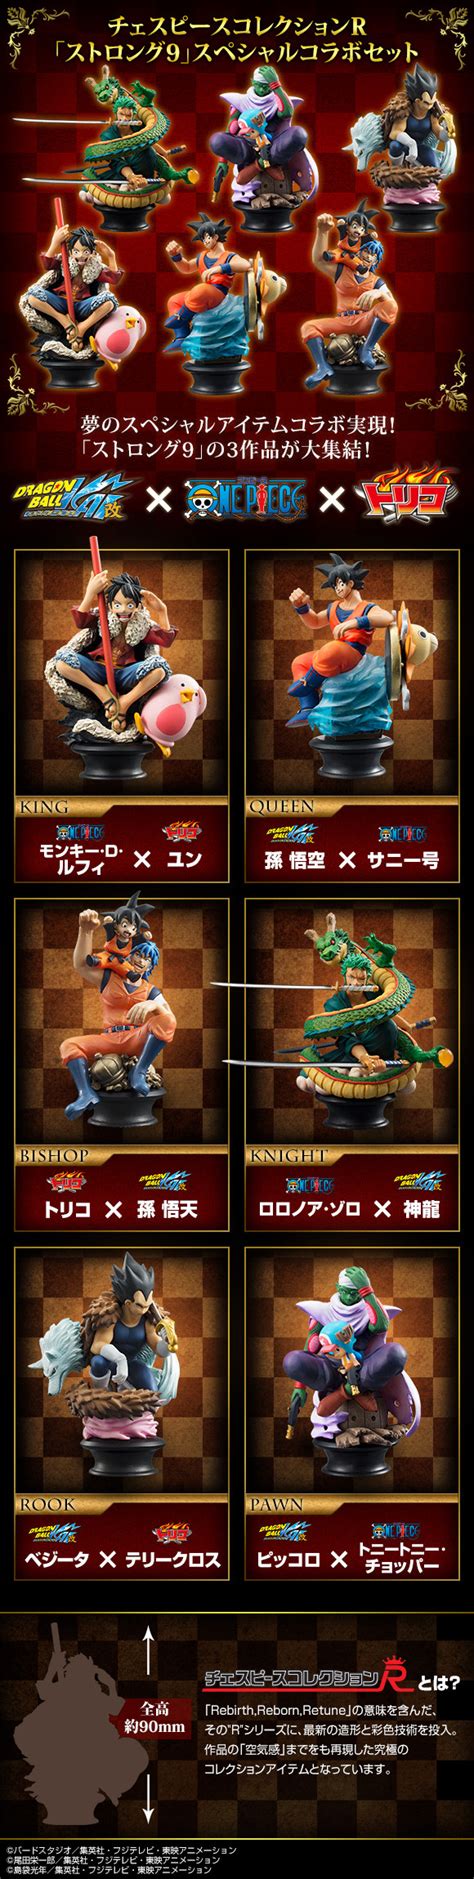 If they're a good character, put them on the white animal figurine chess pieces and sets we carry an amazing selection of chess pieces that should fit any need. Crunchyroll - "Dragon Ball Z Kai" x "One Piece" x "Toriko ...